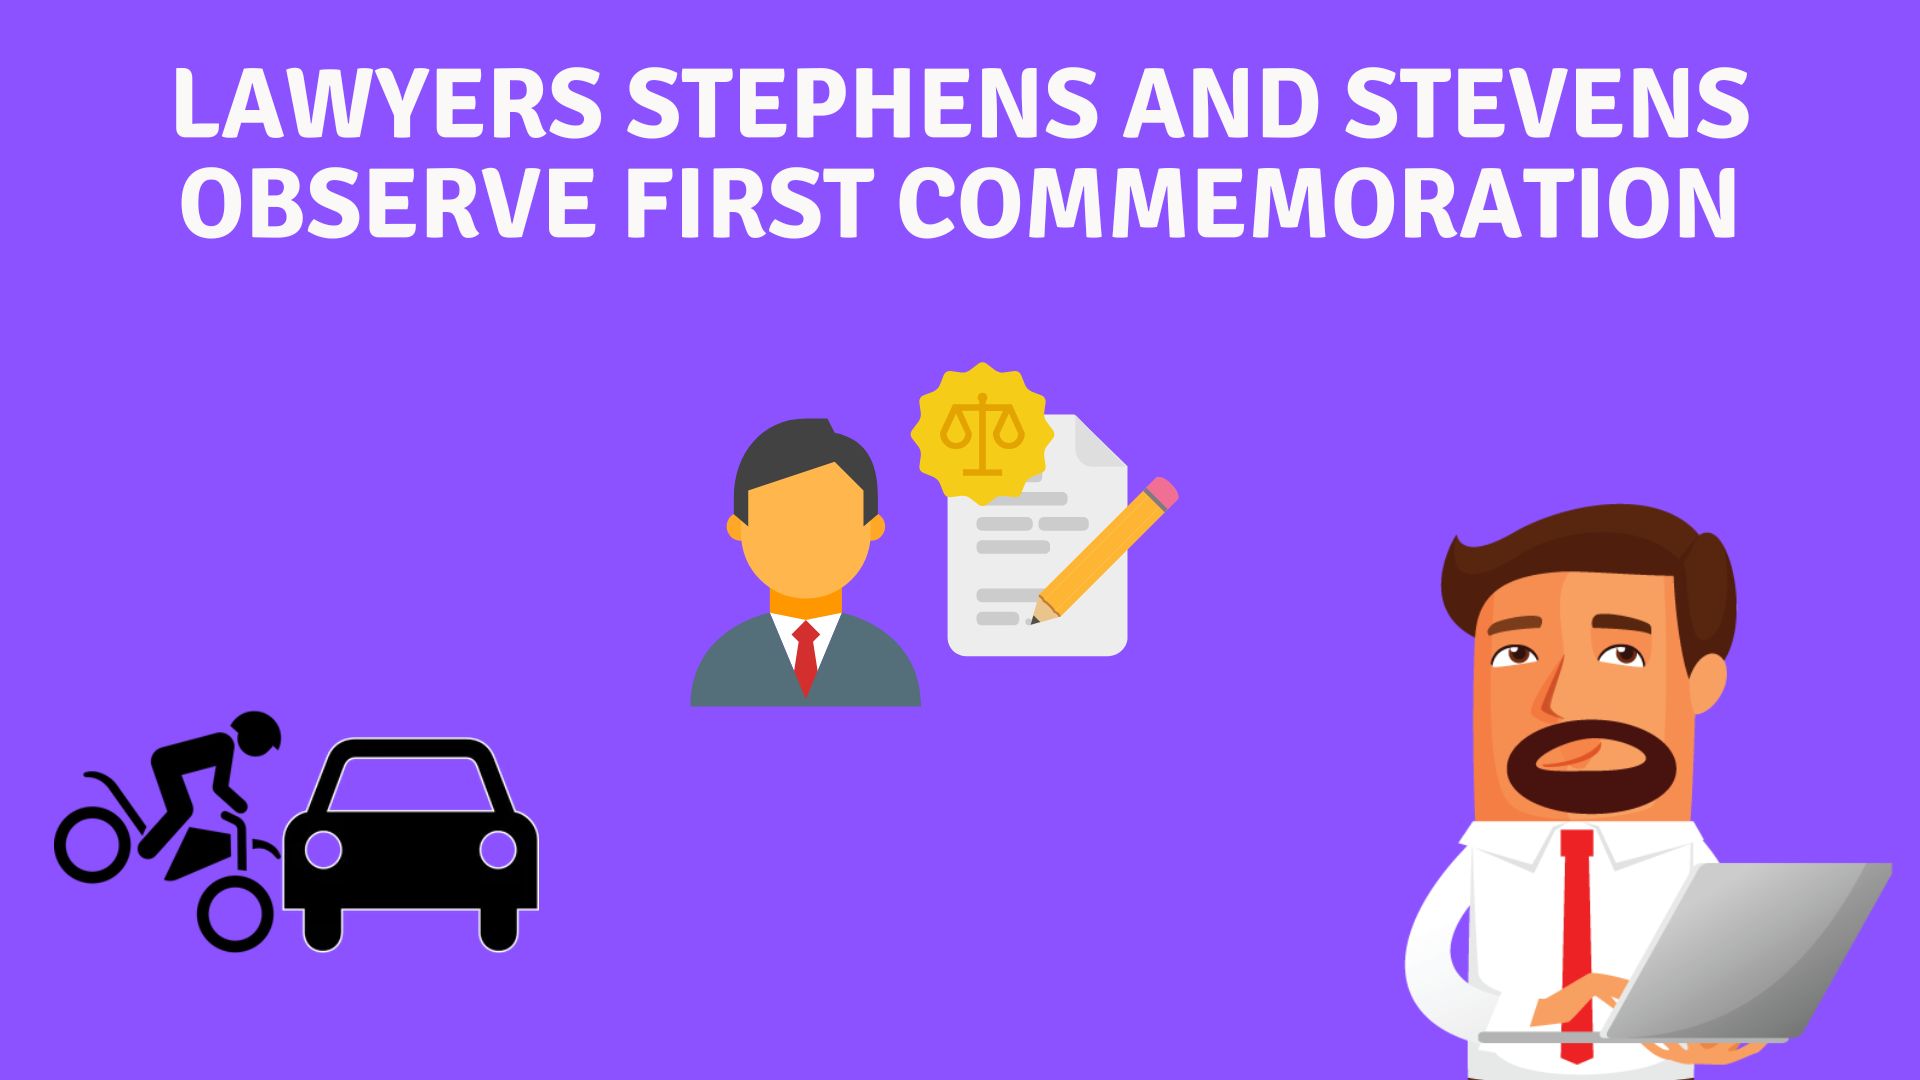 Lawyers stephens and stevens observe first commemoration